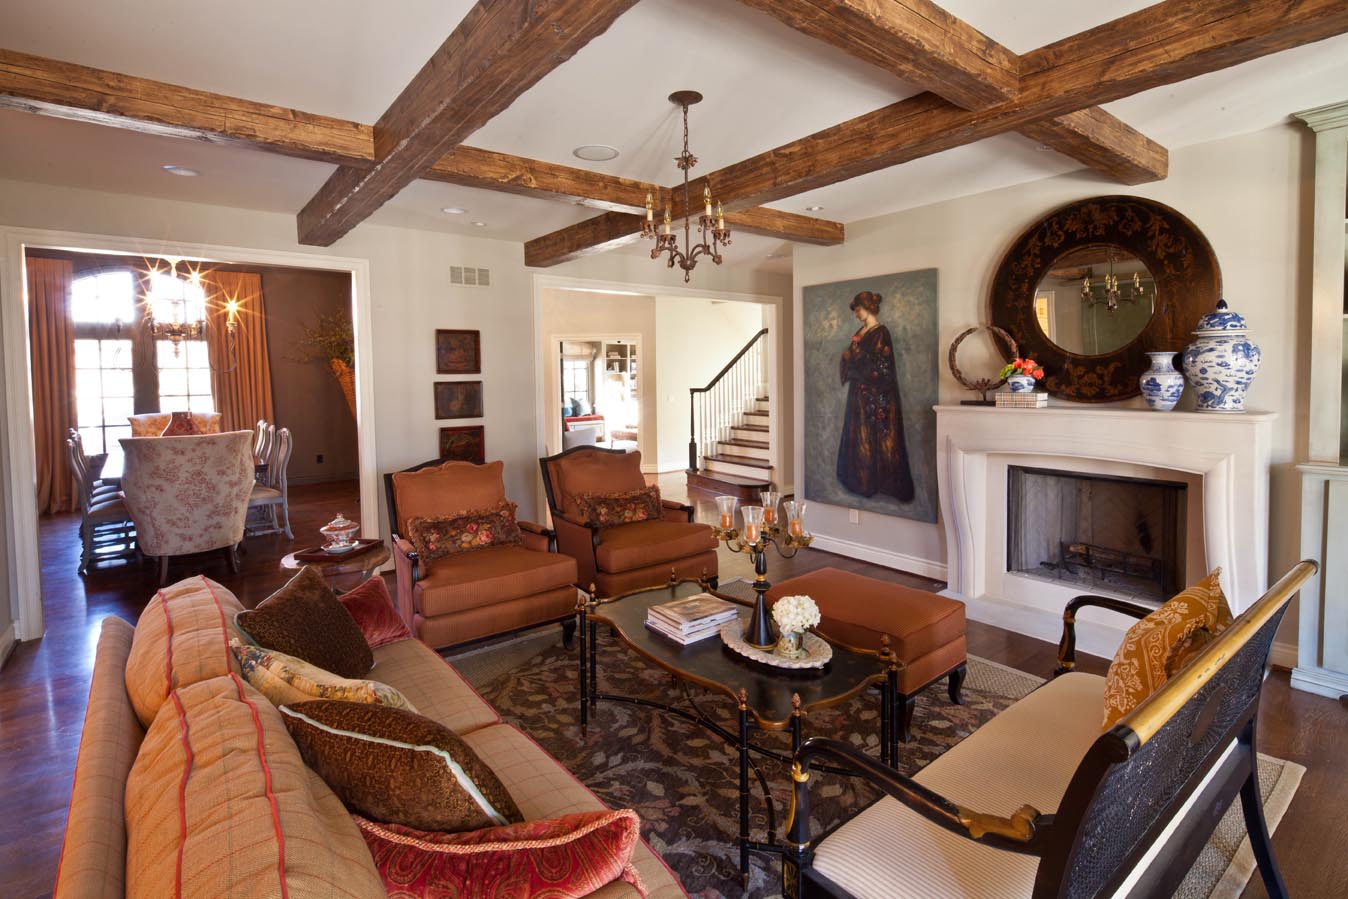 Use Area Rugs To Add Ambiance Nell Hills, Wood Area Rug